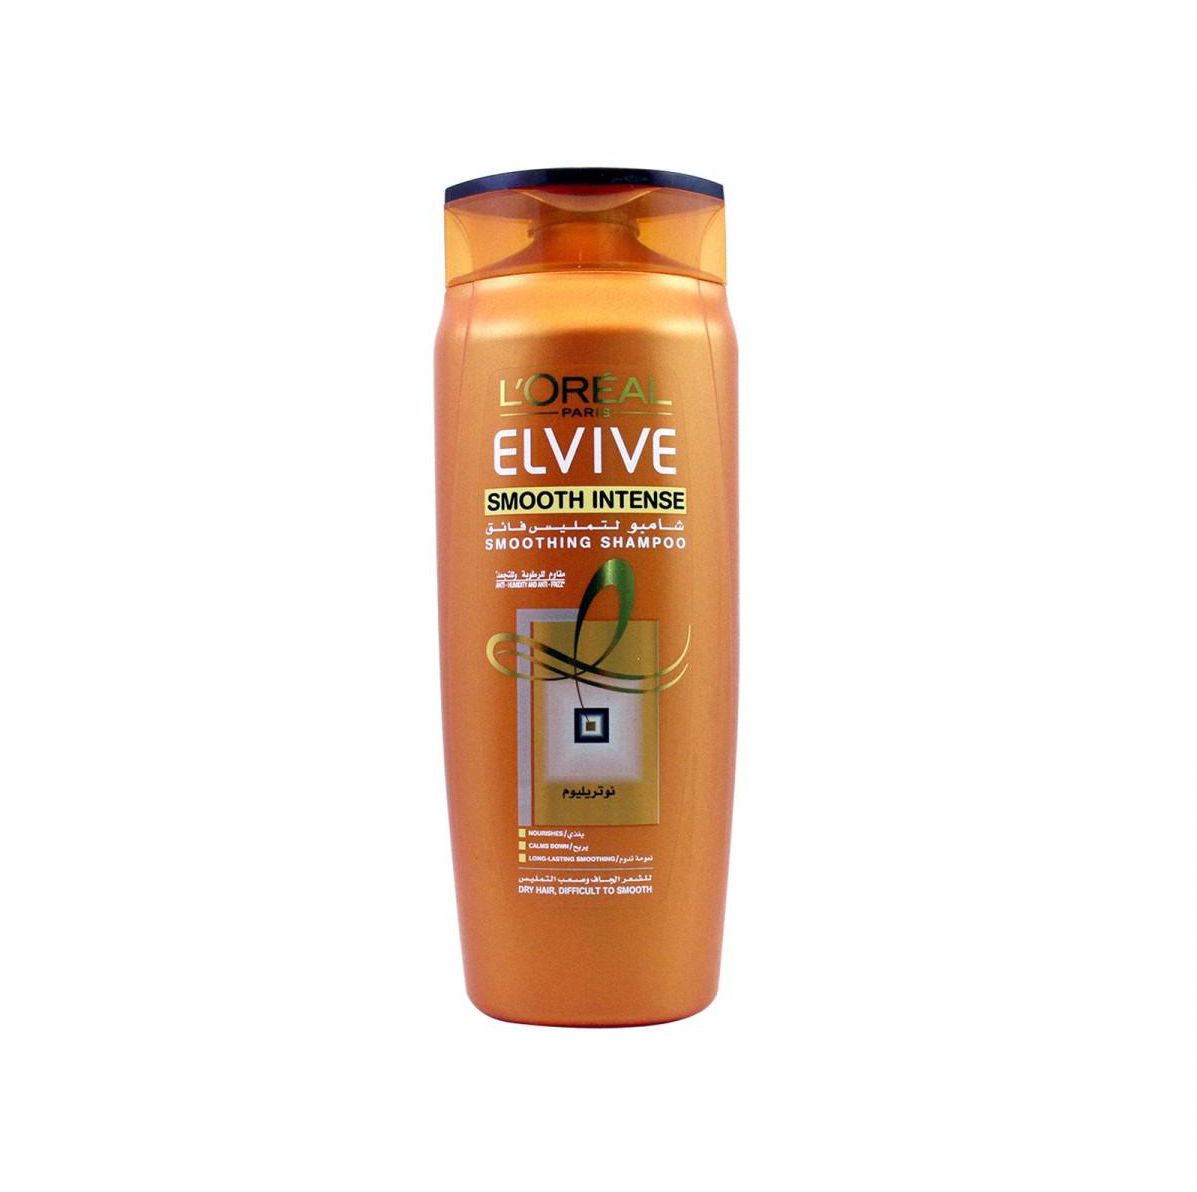 Loreal Elvive Smooth Intense Smoothing Shampoo Dry Hair Diffcult To Smooth 700ml